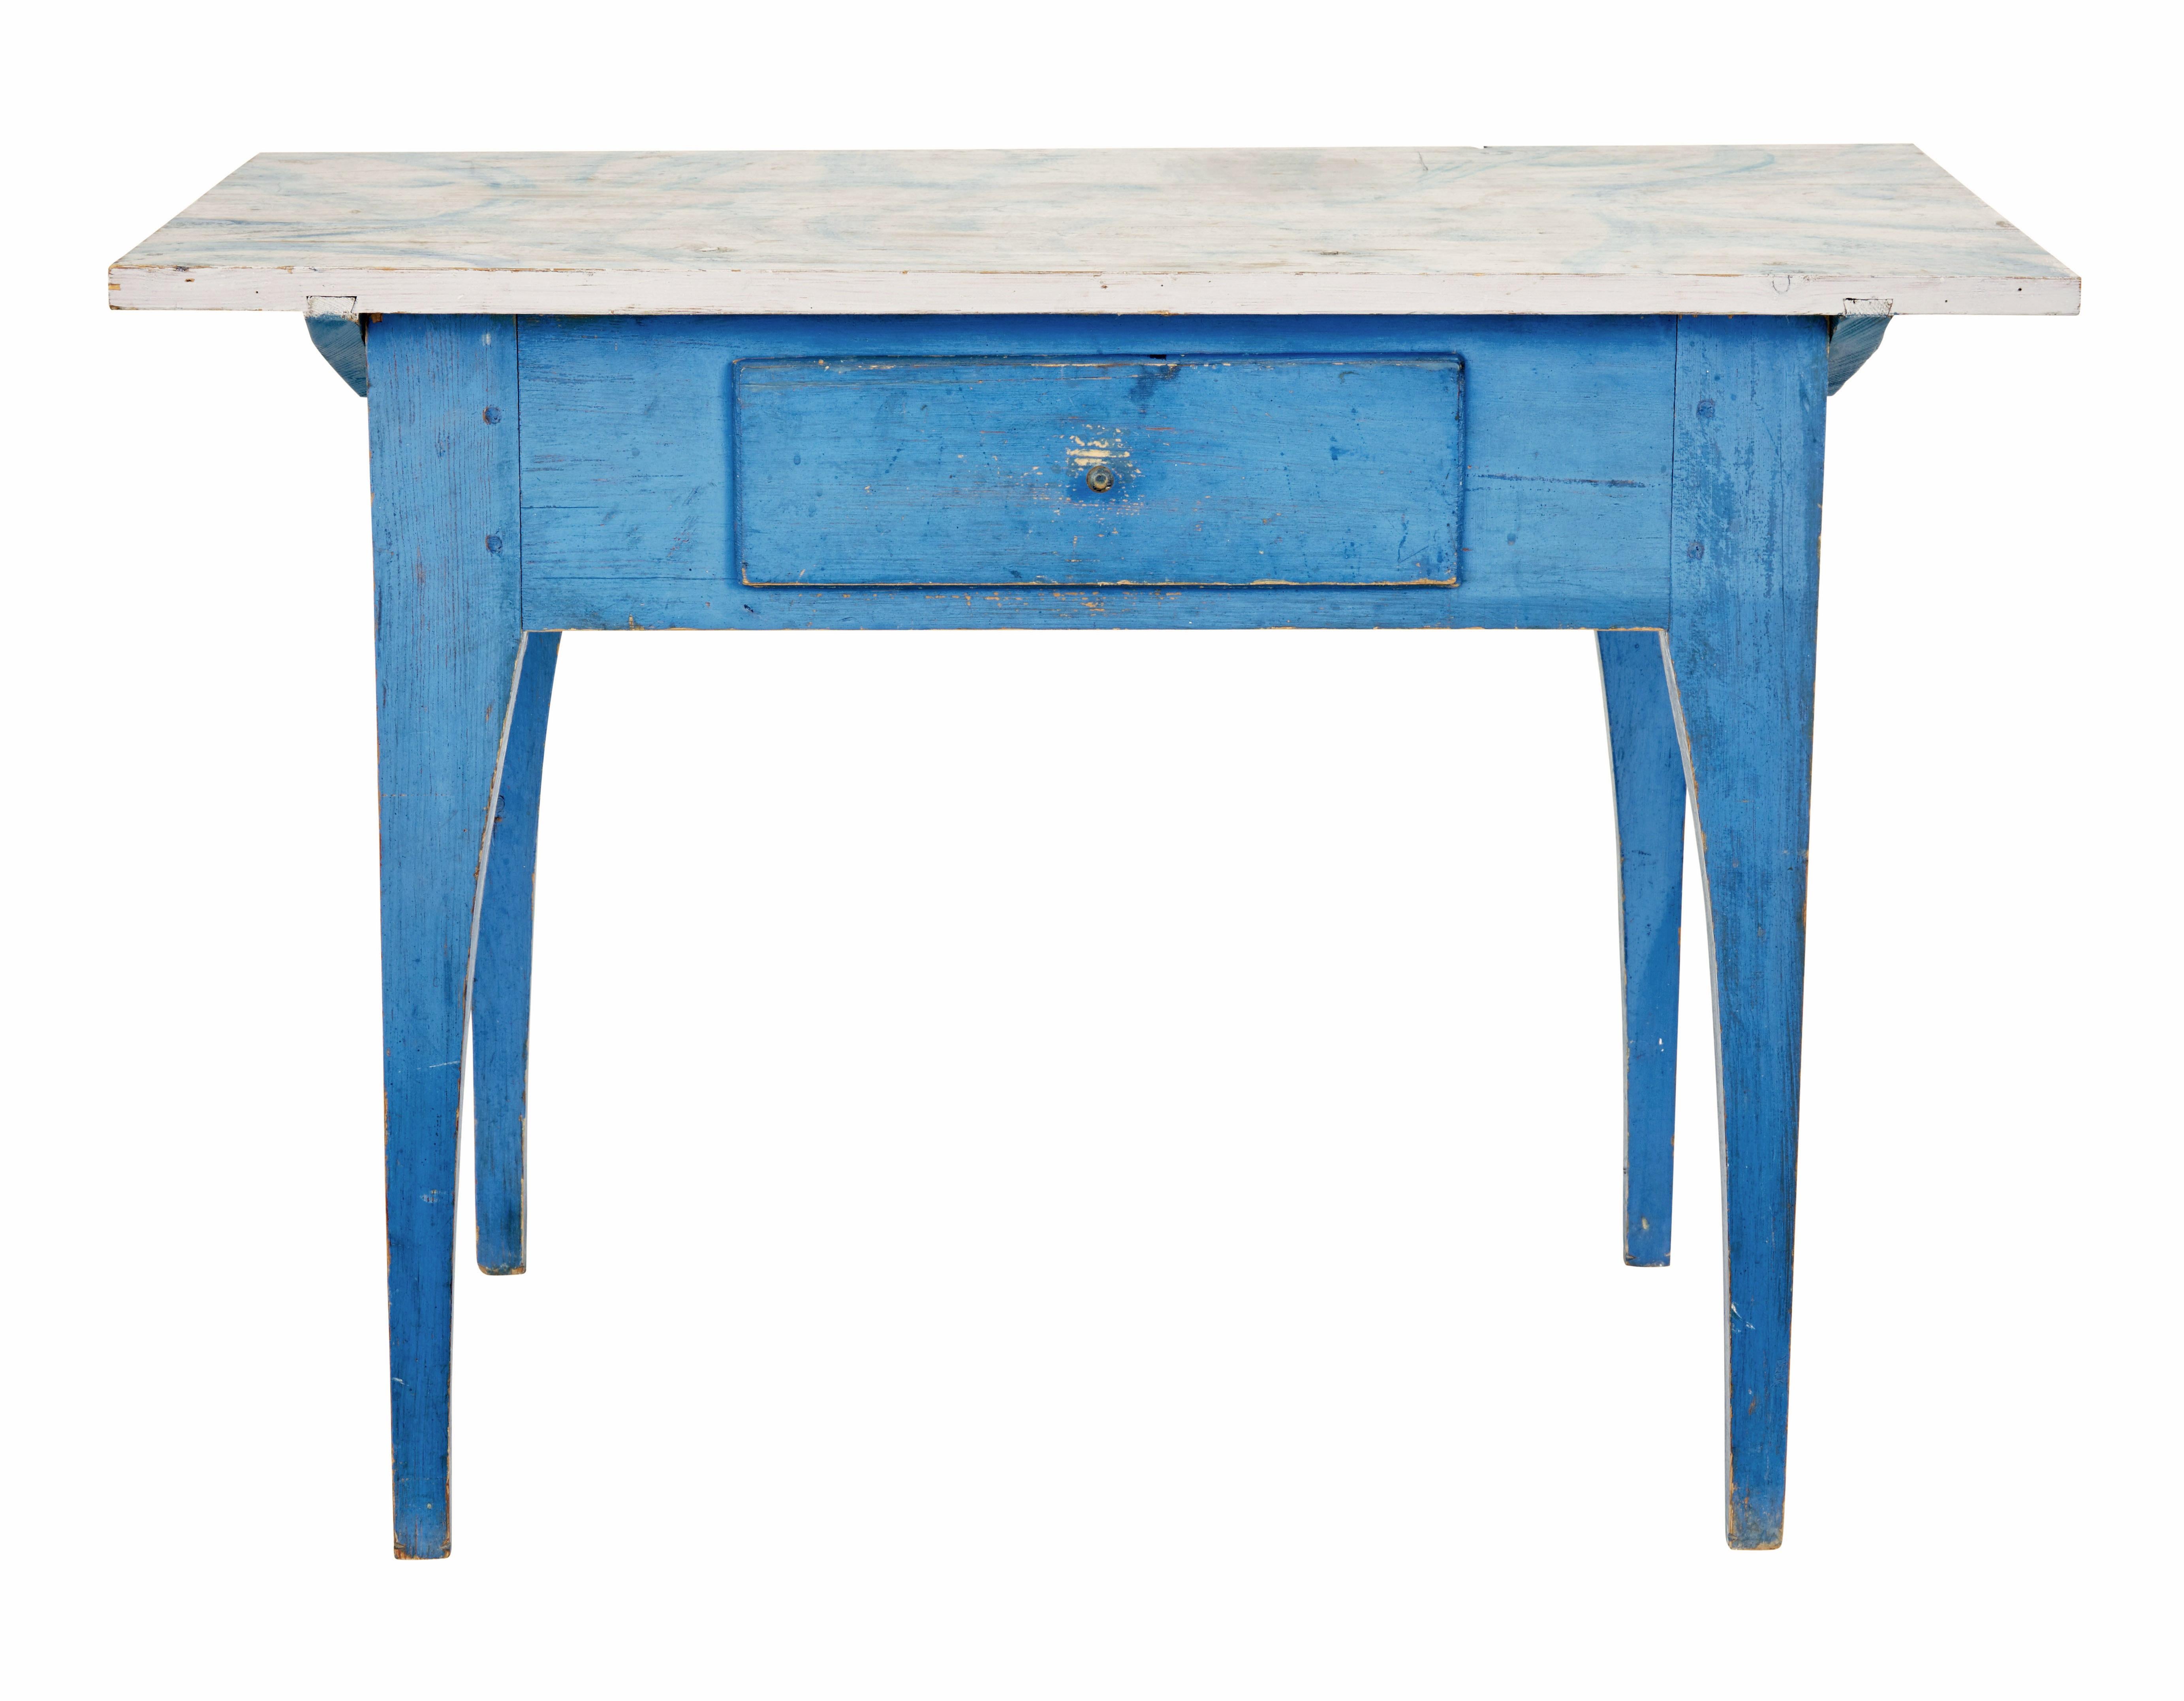 Here we offer a functional piece of 19th century traditional Swedish furniture circa 1890.

Multi purpose table which could serve as a side table, occasional desk or kitchen table.

Traditionally hand painted top surface of grey and blue in a naive